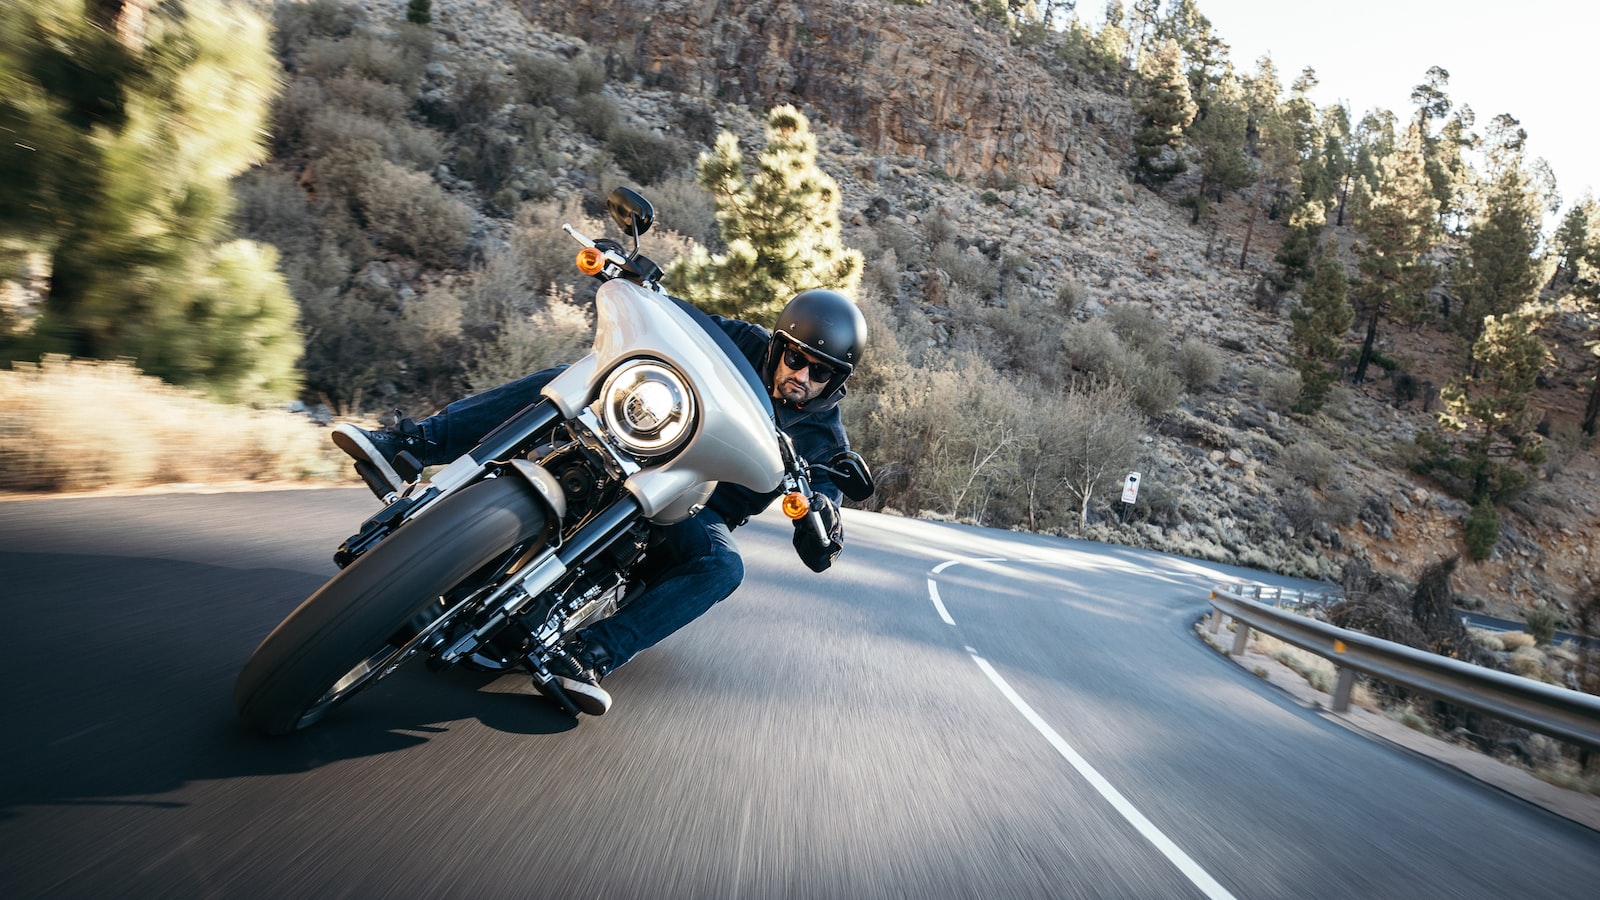 The Ultimate Riding Experience: Recommendations to Find Your Perfect Luxury Motorcycle